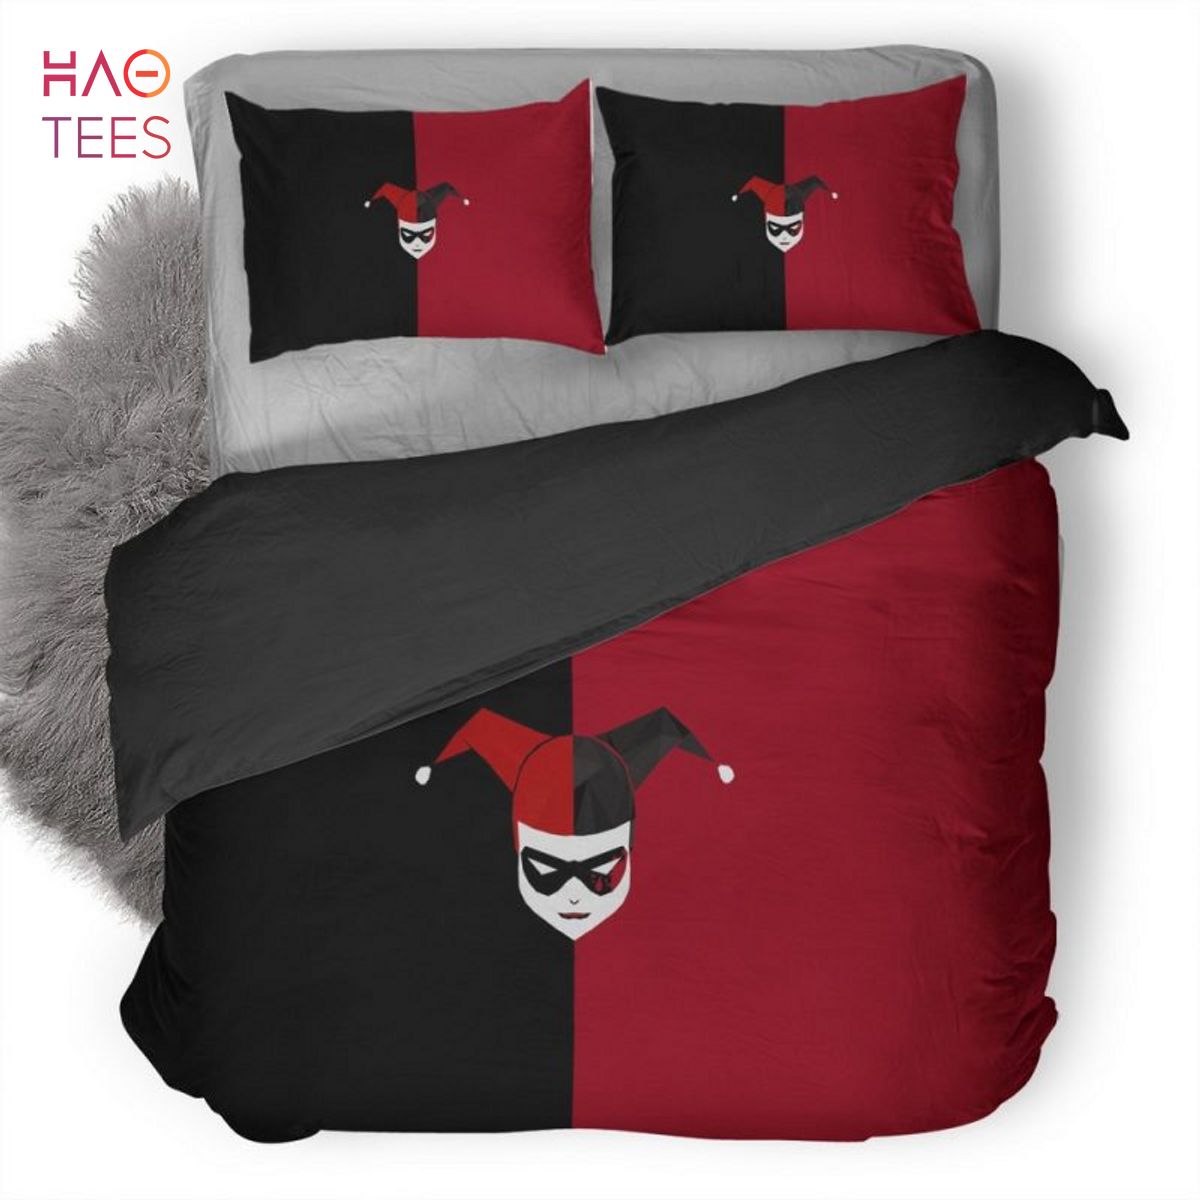 BEST Minimalism Harley Quinn To Duvet Cover and Pillowcase Set Bedding Set